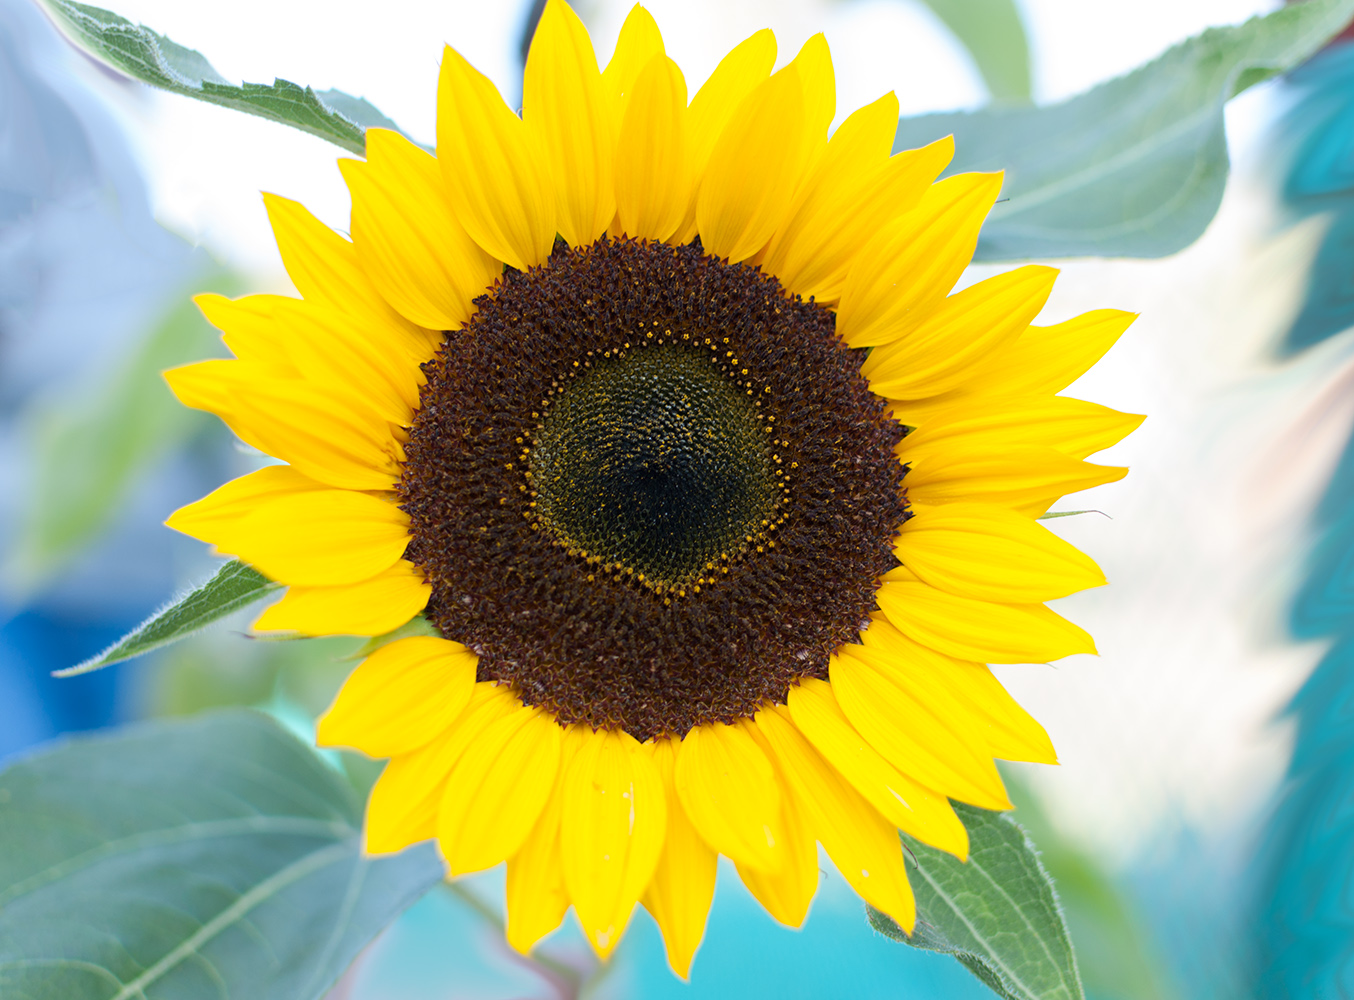 photo "***" tags: nature, sunflower